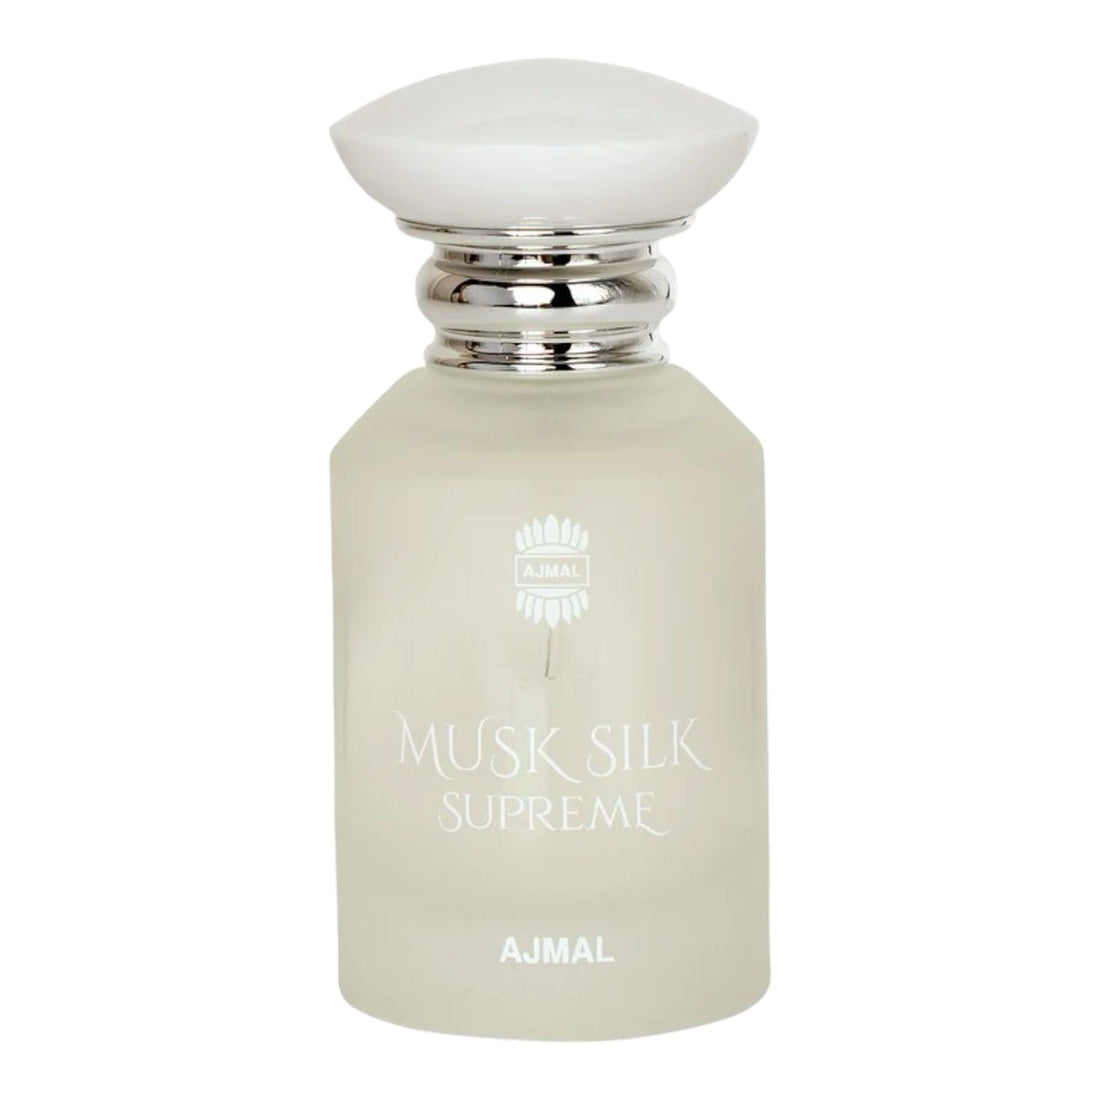 50ml bottle of Ajmal Musk Silk Supreme Eau de Parfum, boasting a unique combination of musky, silky, floral and amber notes.